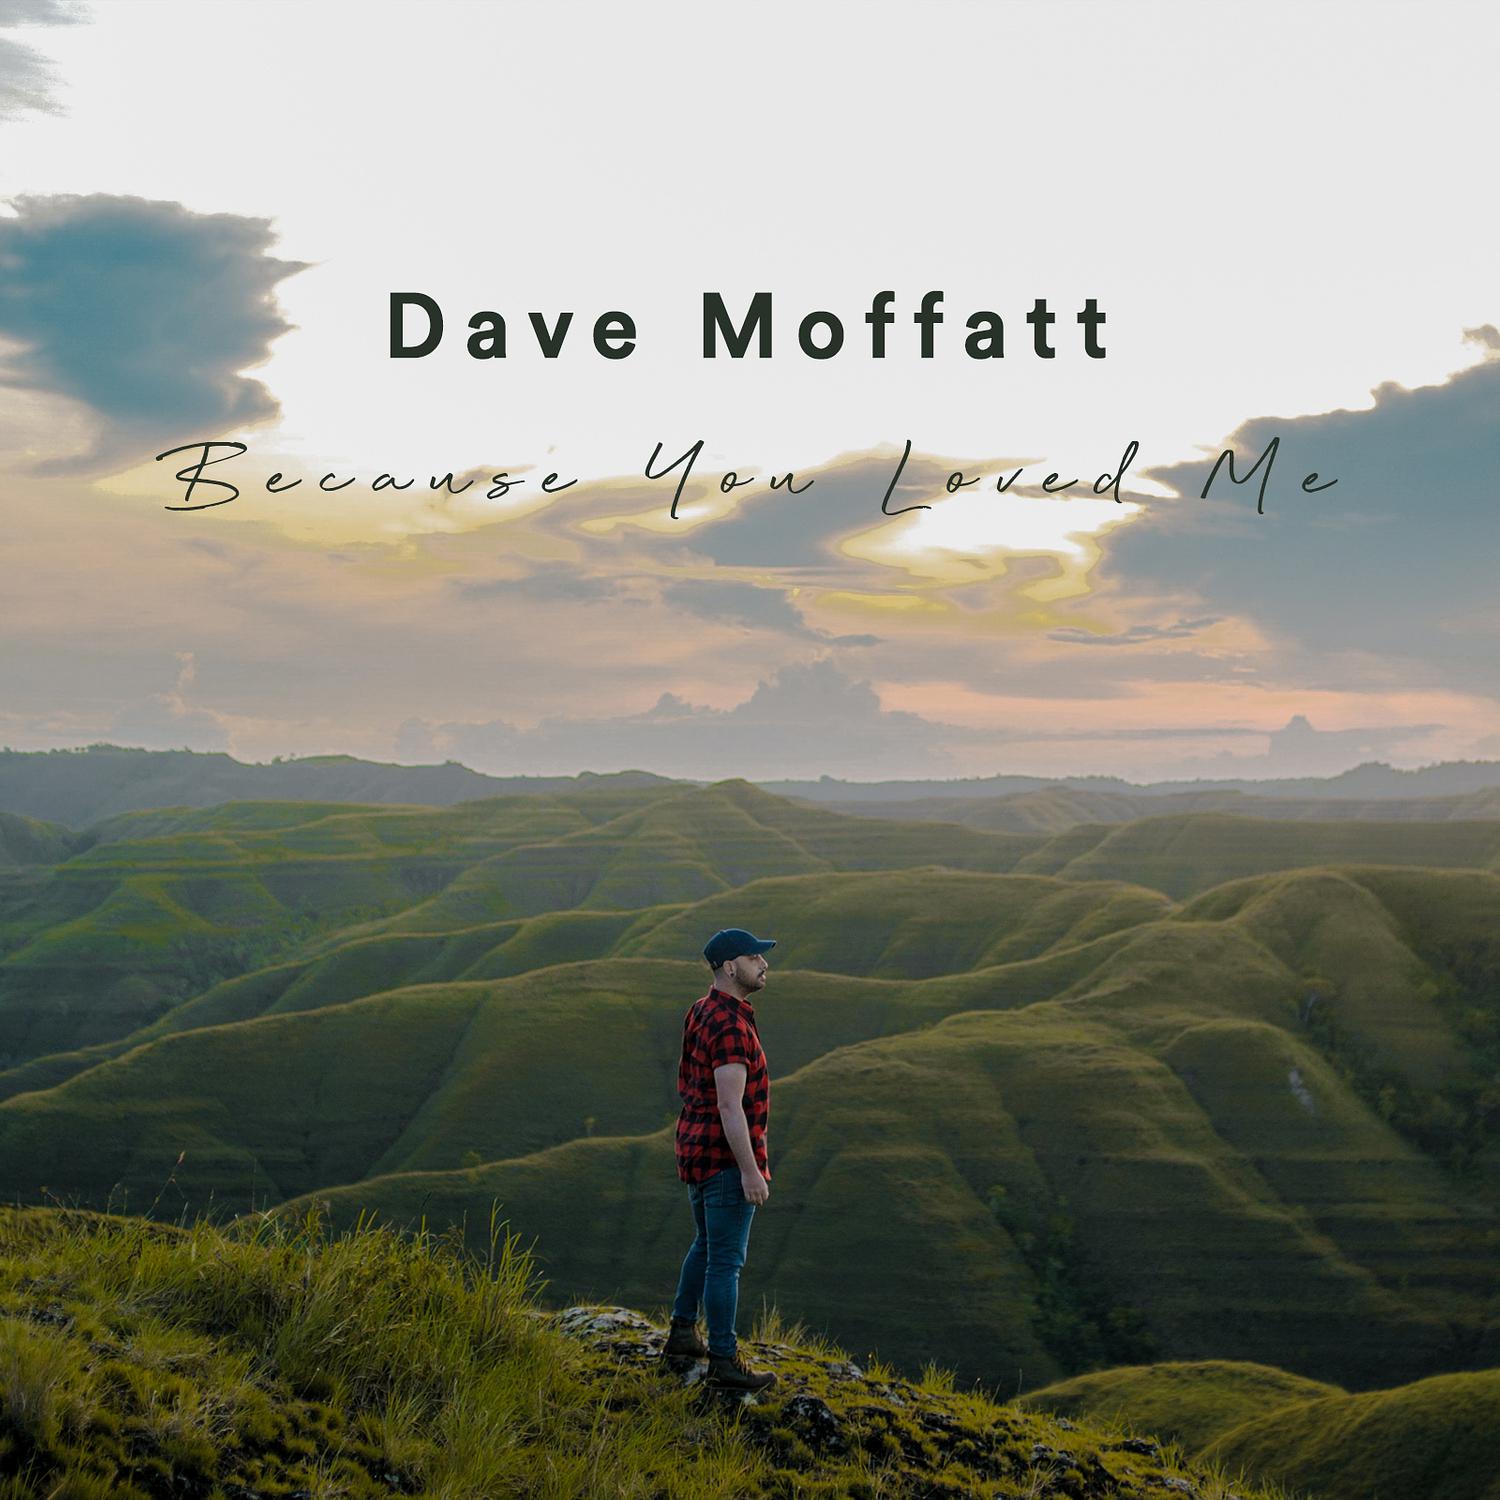 Dave Moffatt - Because You Loved Me